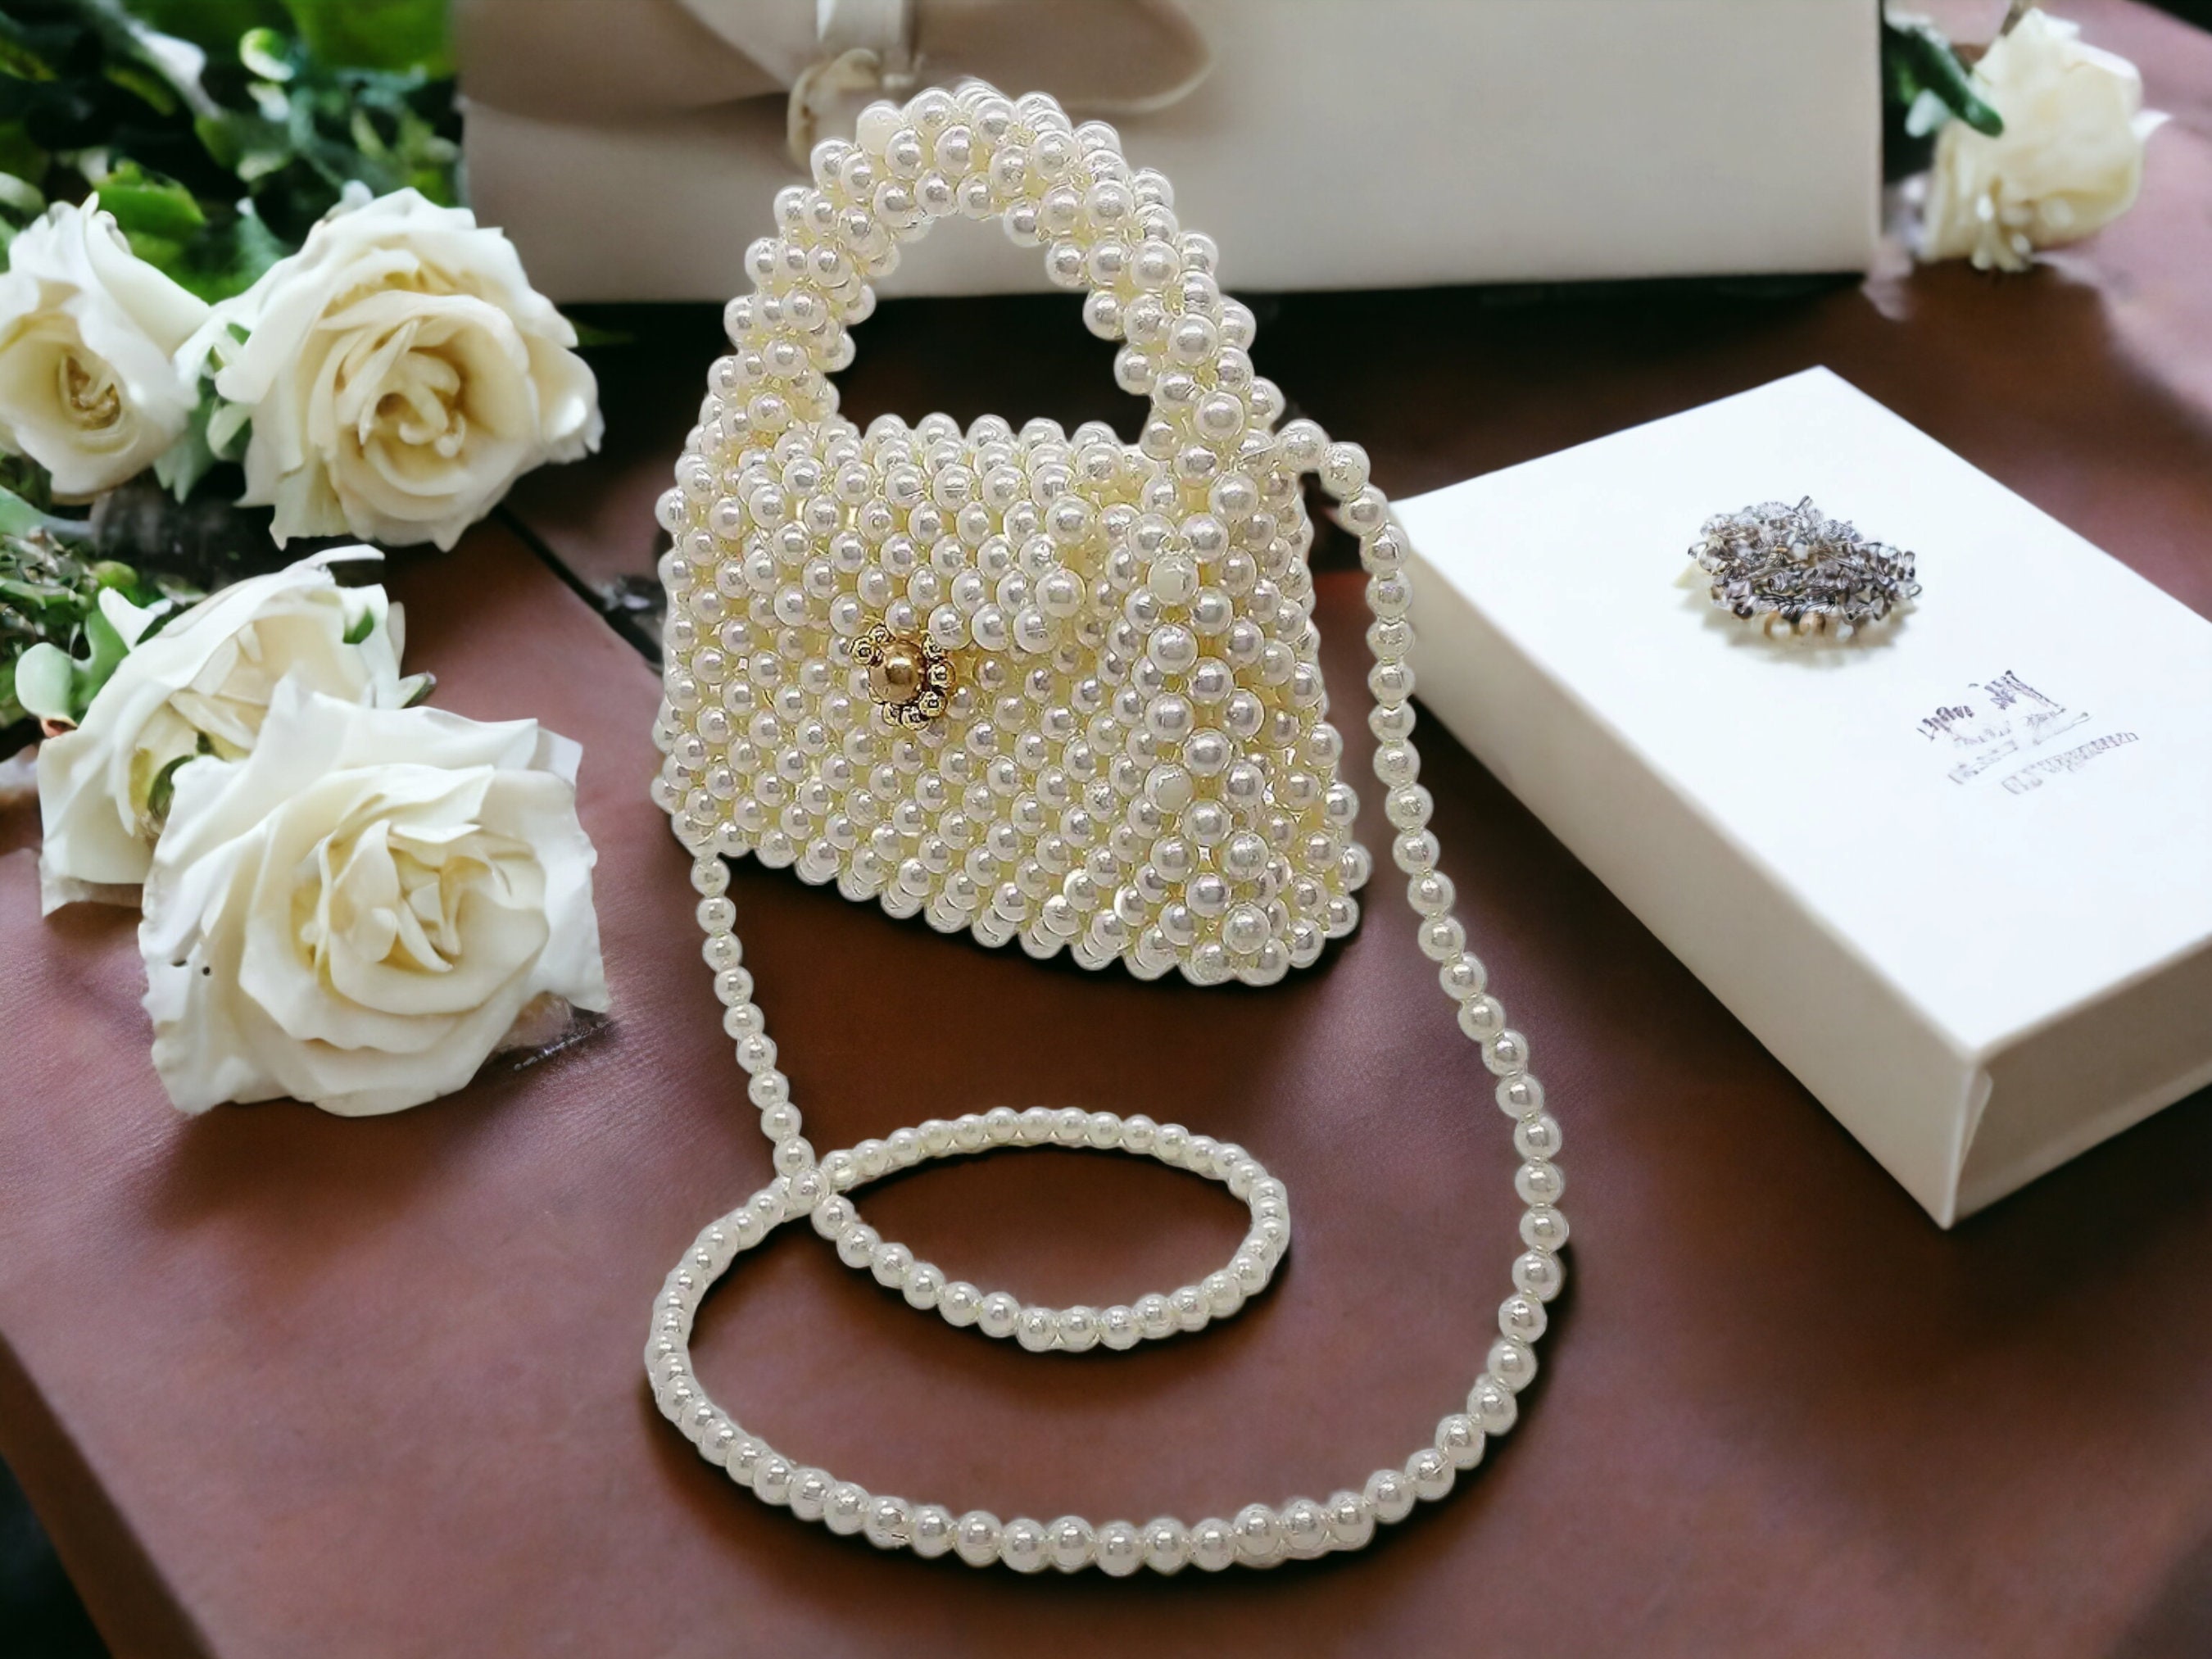 White Beaded Evening Bag Perfect For Brides & Weddings